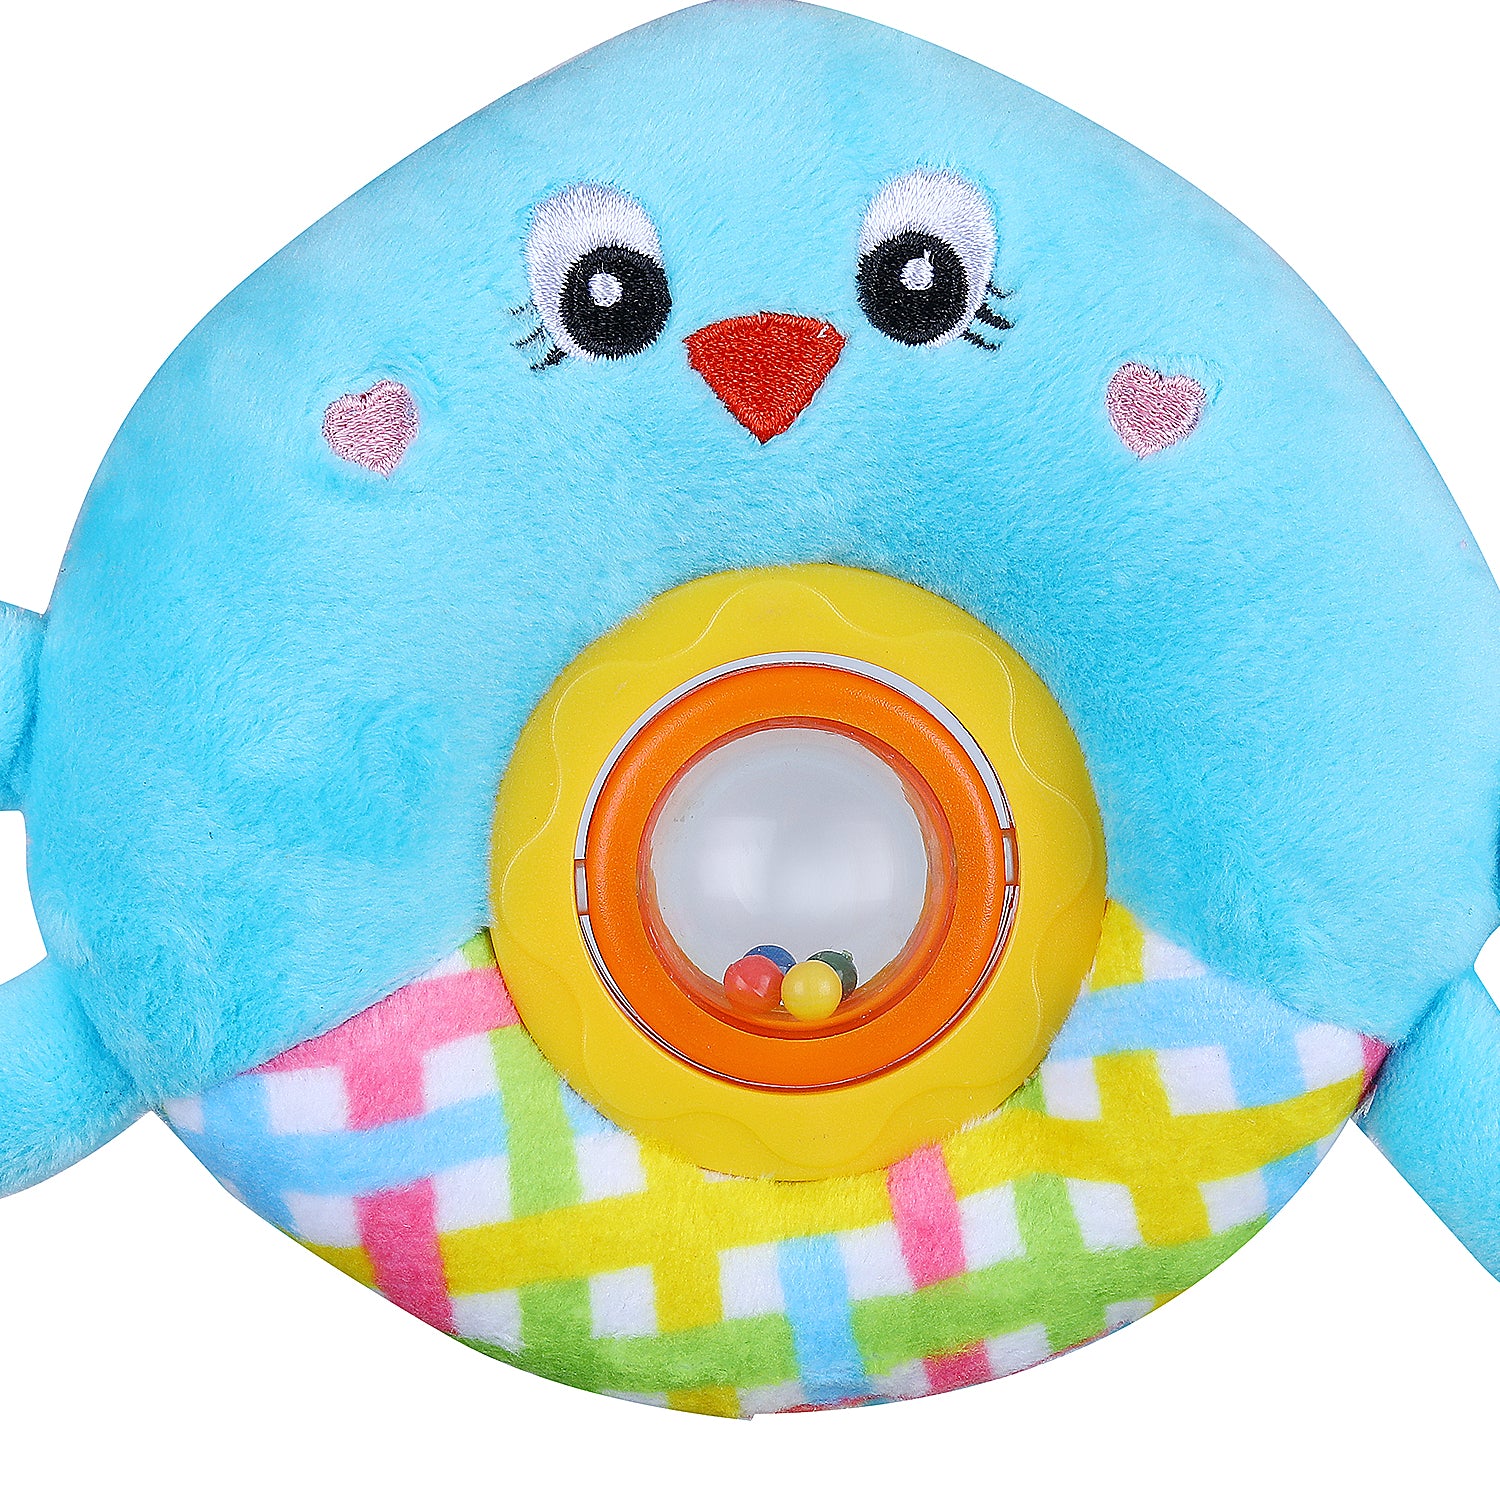 Bird Stroller Crib Hanging Plush Rattle Toy With Teether - Blue - Baby Moo